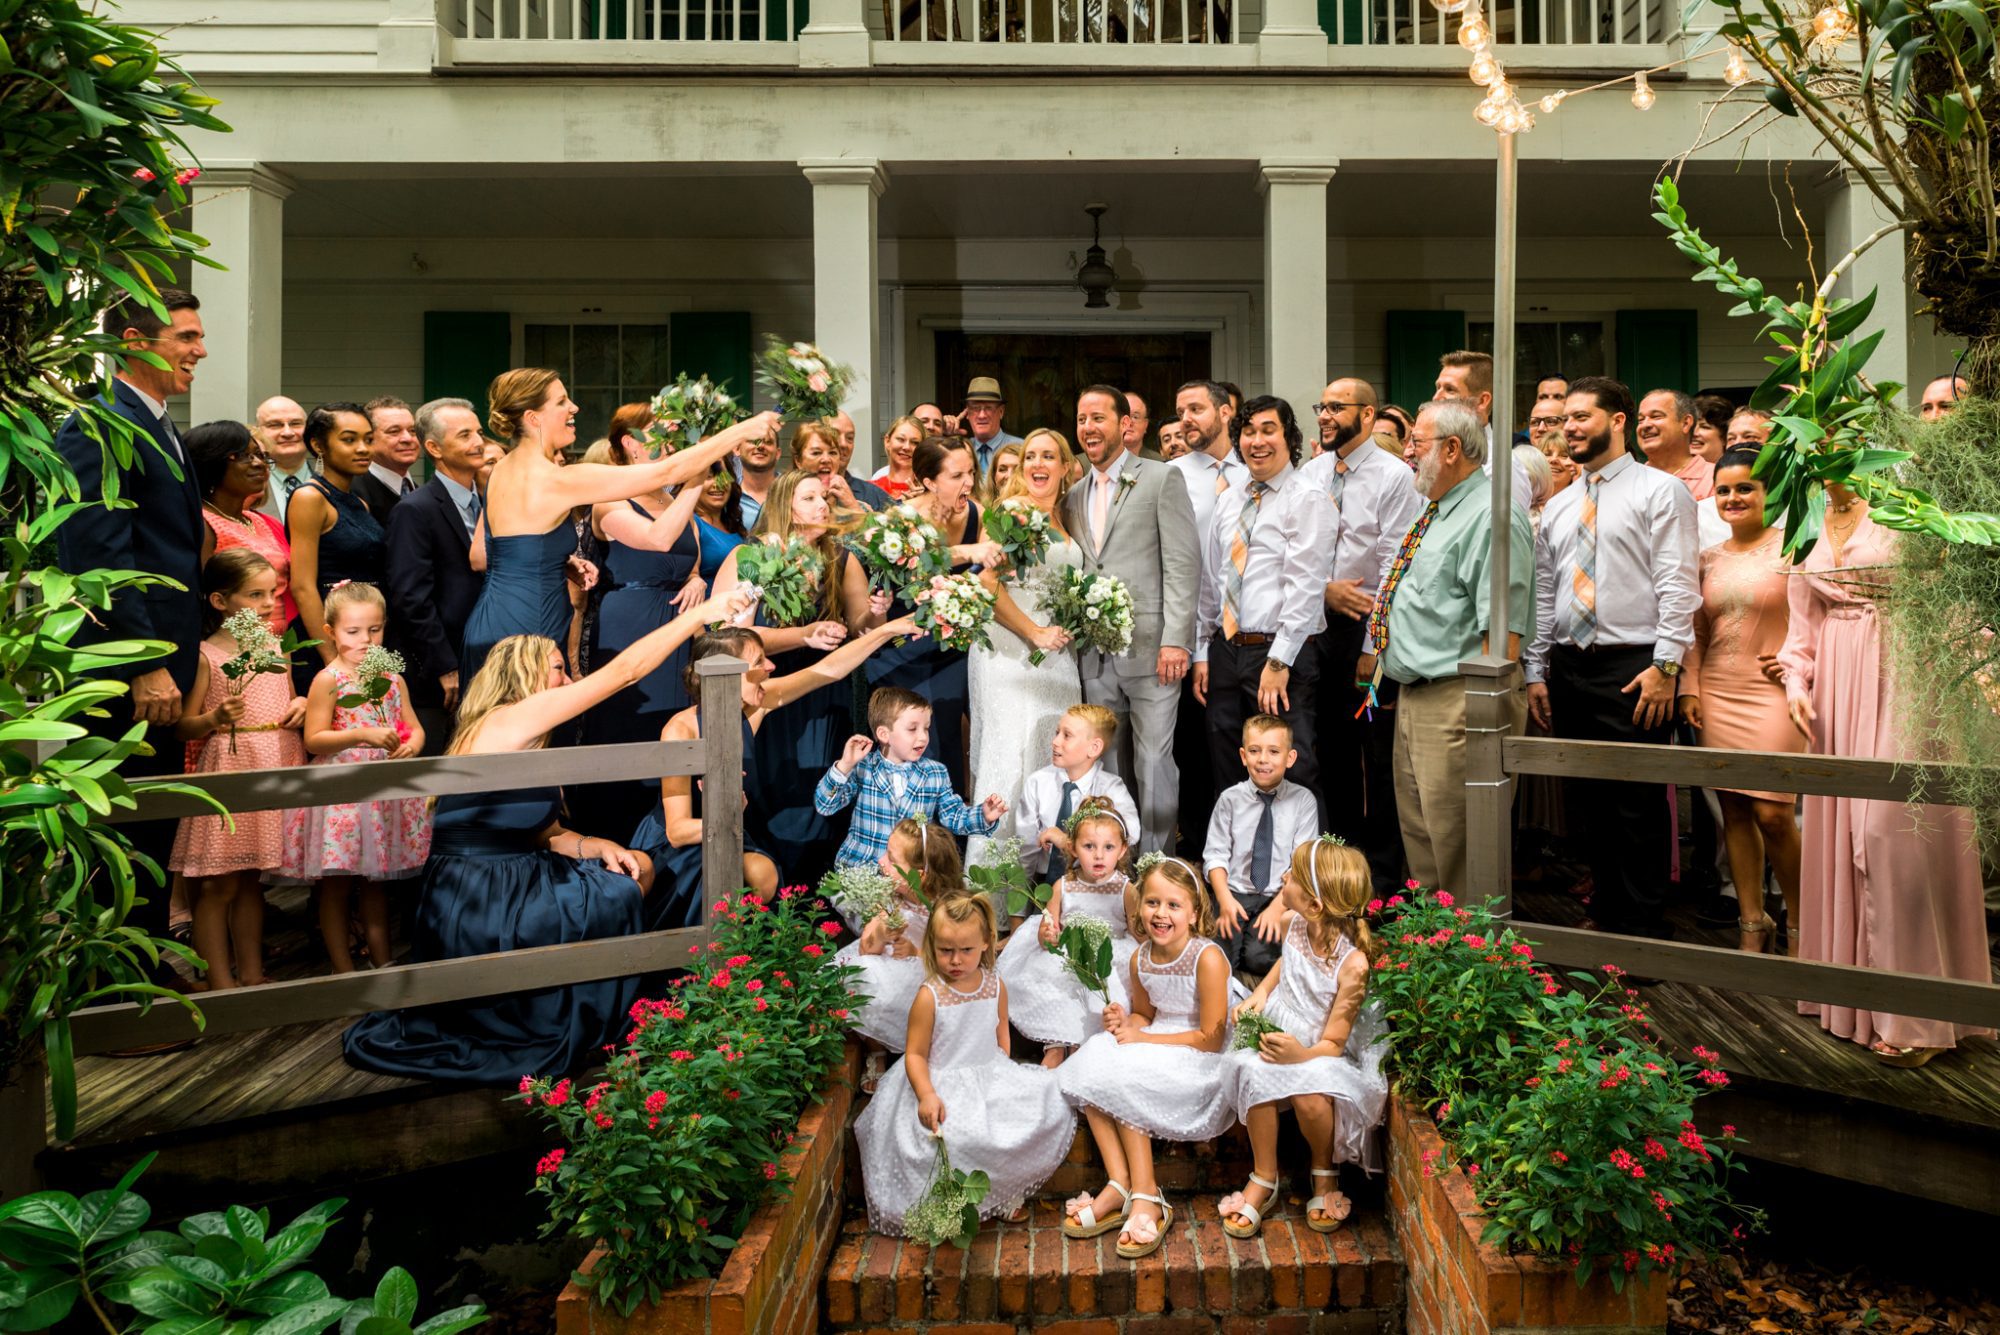 A Key West wedding party posing in front of the Audubon House and Gardens.